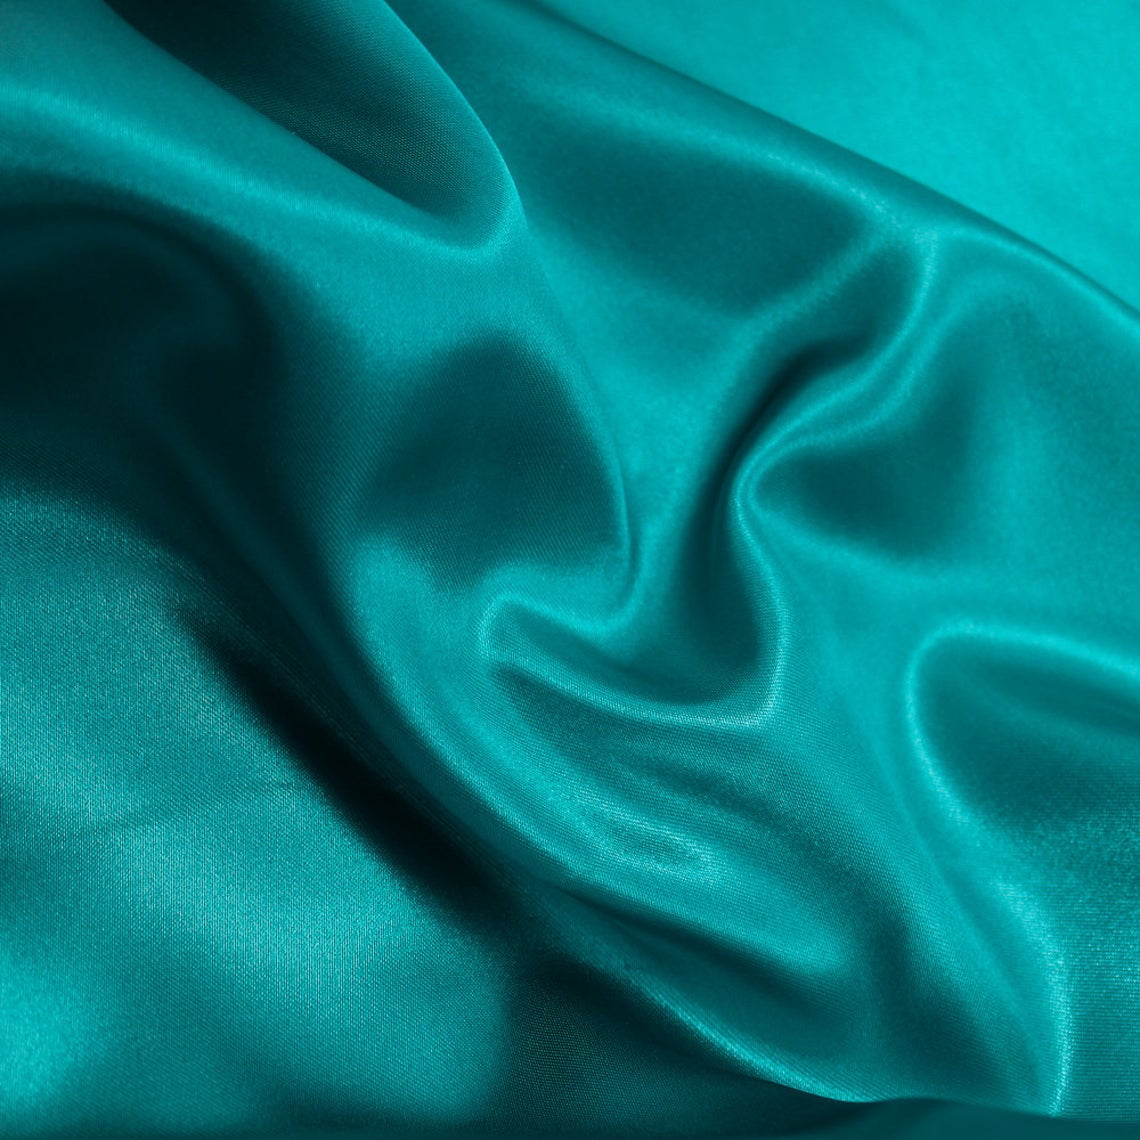 1 meter bluey green silky soft charmeuse satin fabric 58” wide